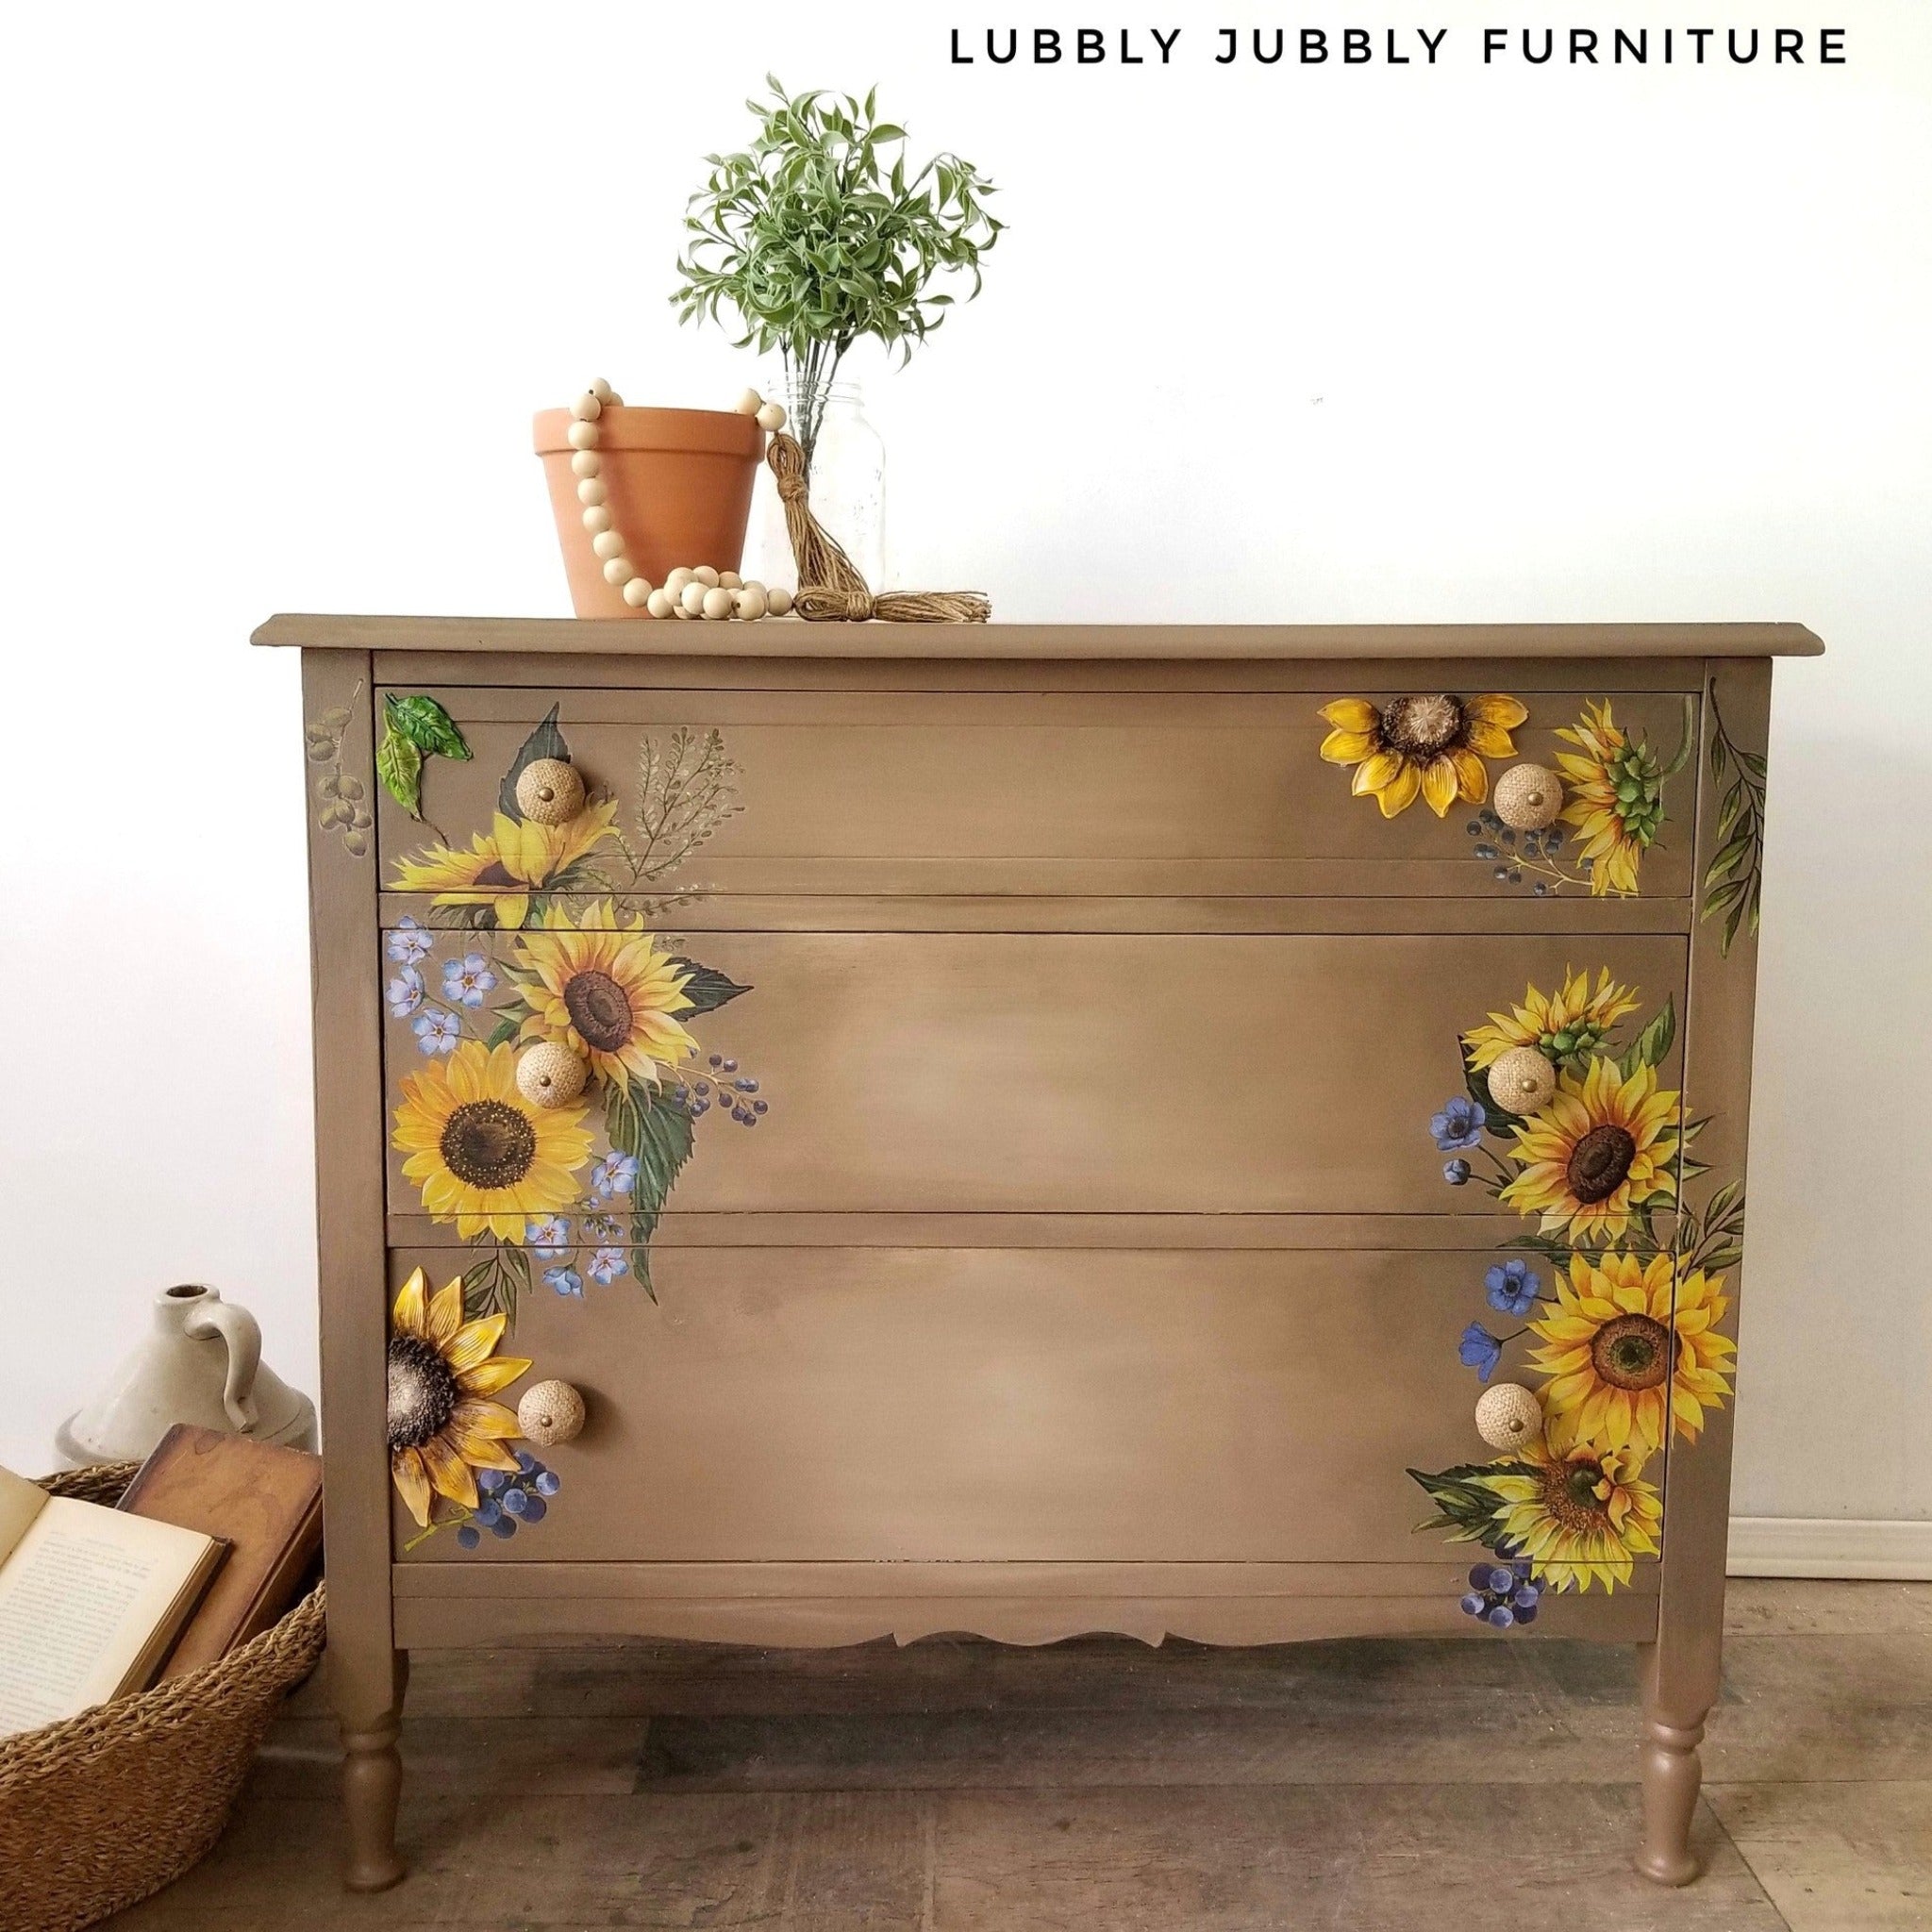 A vintage 3-drawer dresser refurbished by Lubbly Jubbly Furniture is painted a blend of light and medium brown and features ReDesign with Prima's Sunflower Fields on the left and right side of the front of its drawers.